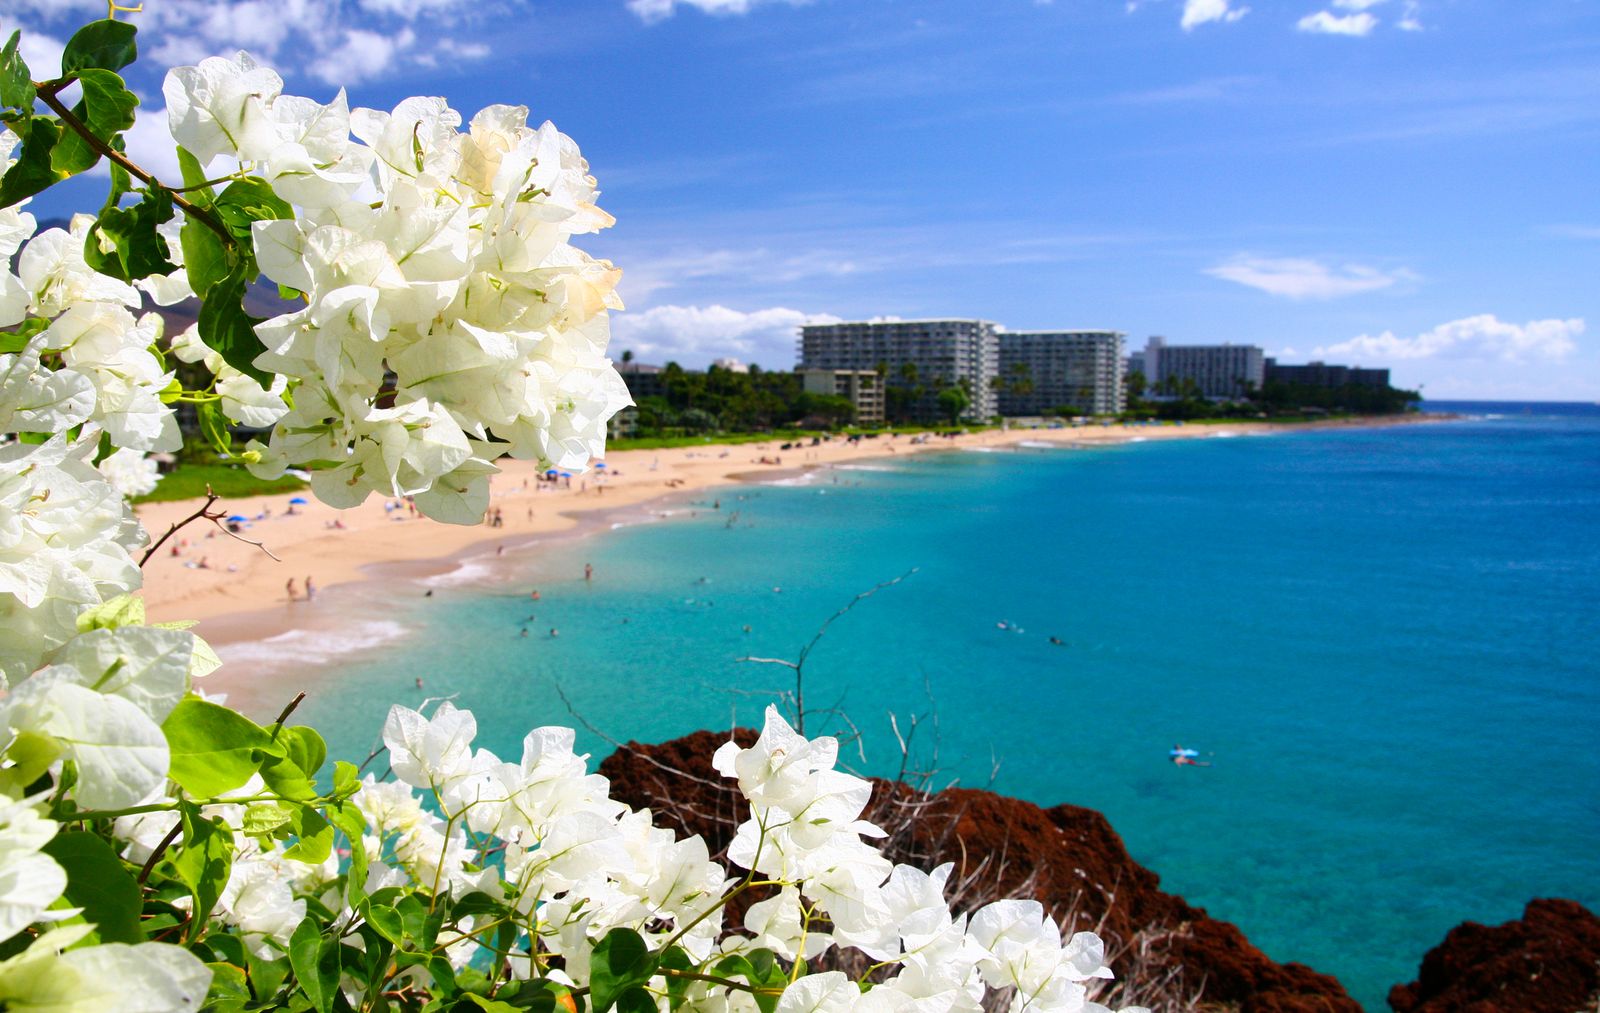 Hawaii Travel Q&A Everything you need to know, and more! Hawaii Life